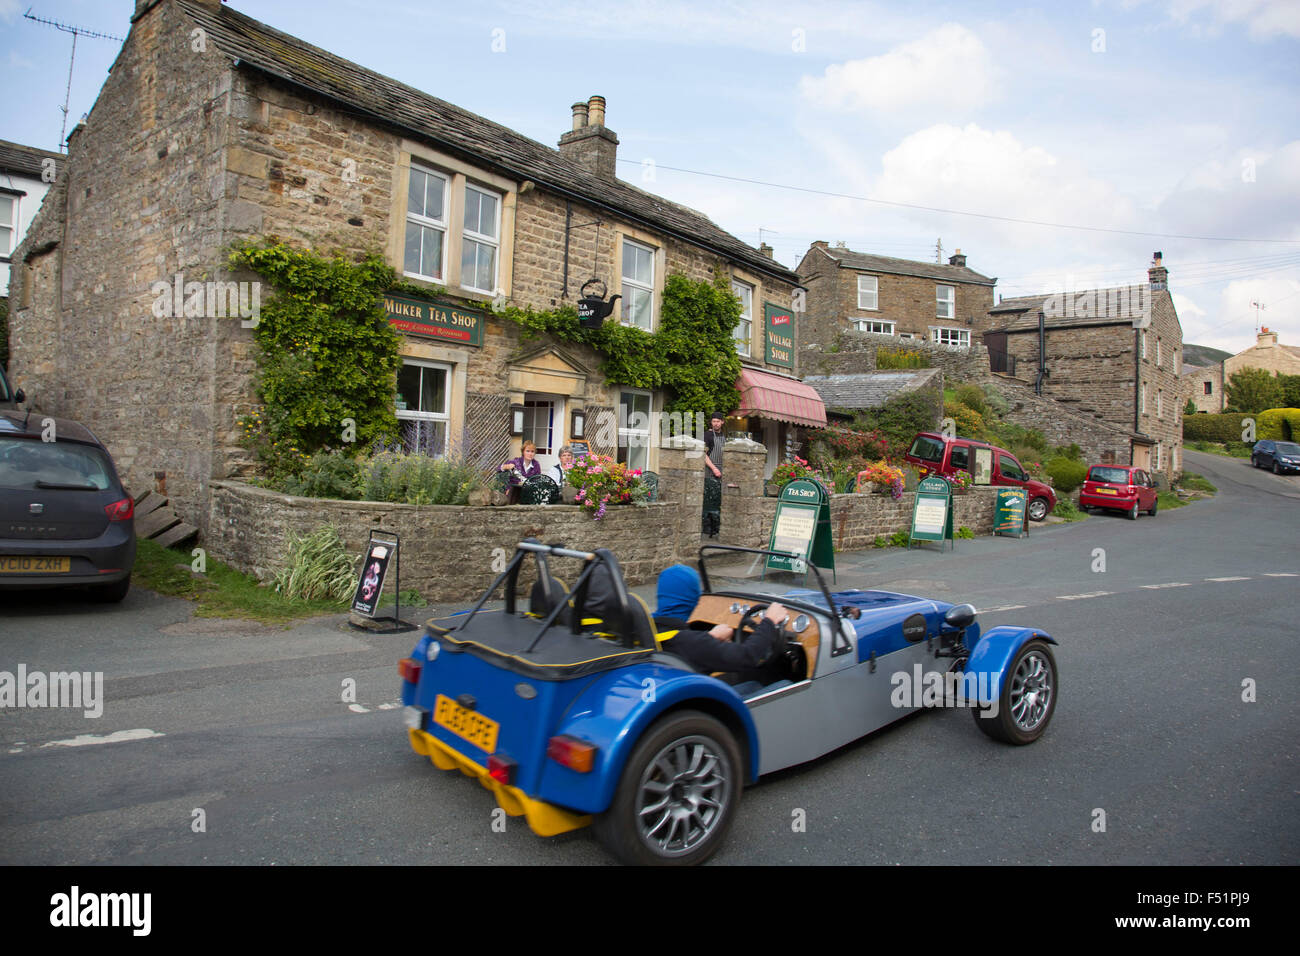 Kit car passes the village shop in Muker in Swaledale, which runs broadly from west to east. To the south and east of the ridge a number of smaller dales. Swaledale is a typical limestone Yorkshire dale, with its narrow valley-bottom road. Yorkshire, England, UK. Stock Photo